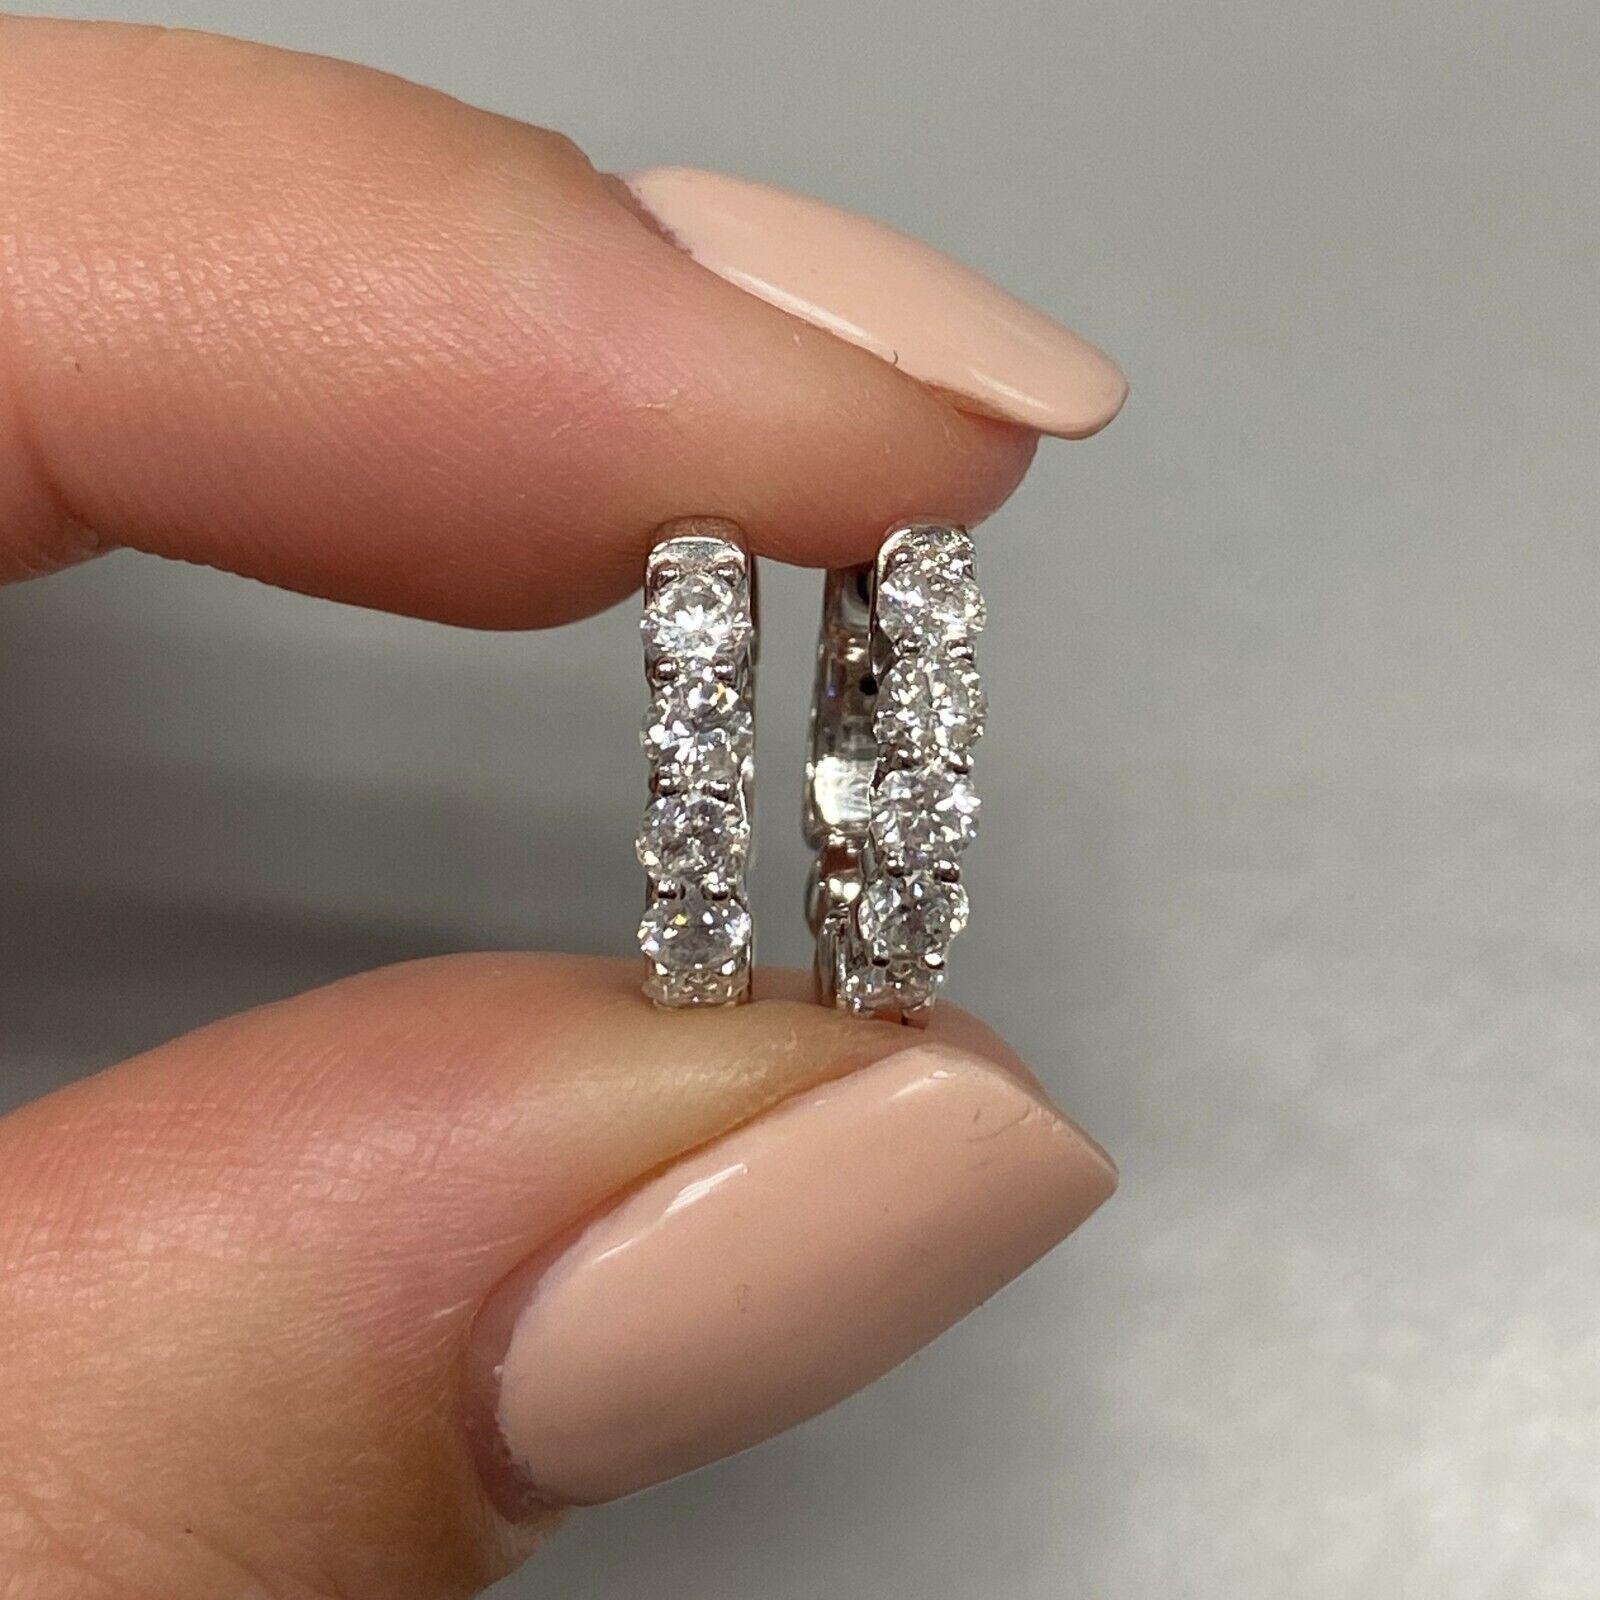 Specifications:
    main stone:DIAMONDS
    diamonds:10 PCS
    carat total weight: 0.61 ctw
    color:G-H
    clarity:SI3-I1
    metal:14K GOLD
    TYPE:     earrings
    weight:3.03 gr
    DIAMETER:0.5 INCH

